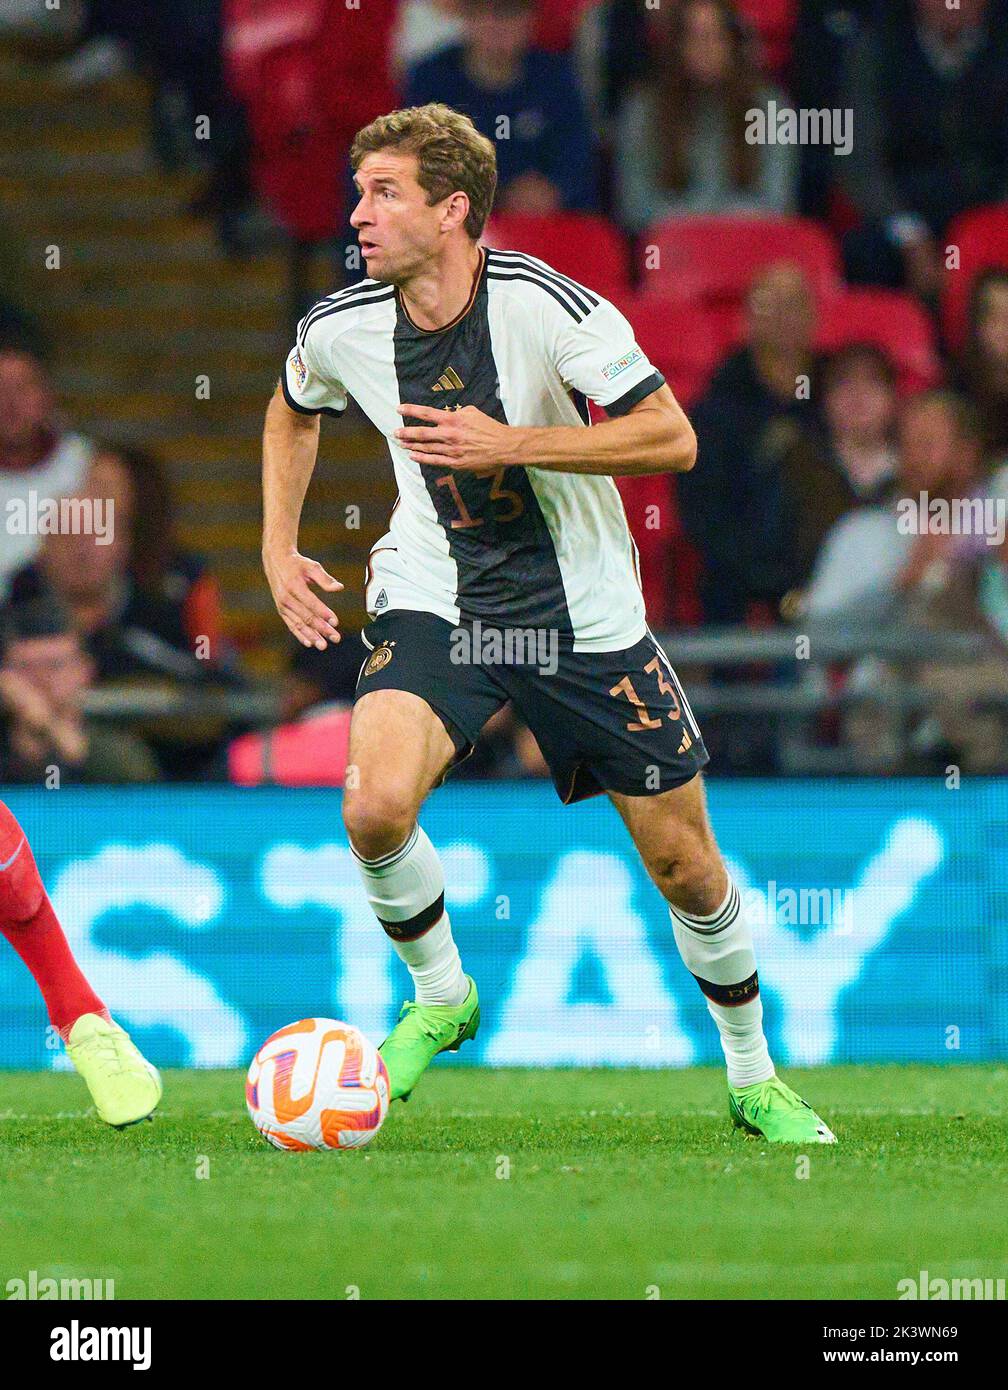 Thomas Müller, DFB 13  in the UEFA Nations League 2022 match  ENGLAND - GERMANY 3-3  in Season 2022/2023 on Sept 26, 2022  in London, Great Britain.  © Peter Schatz / Alamy Live News Stock Photo